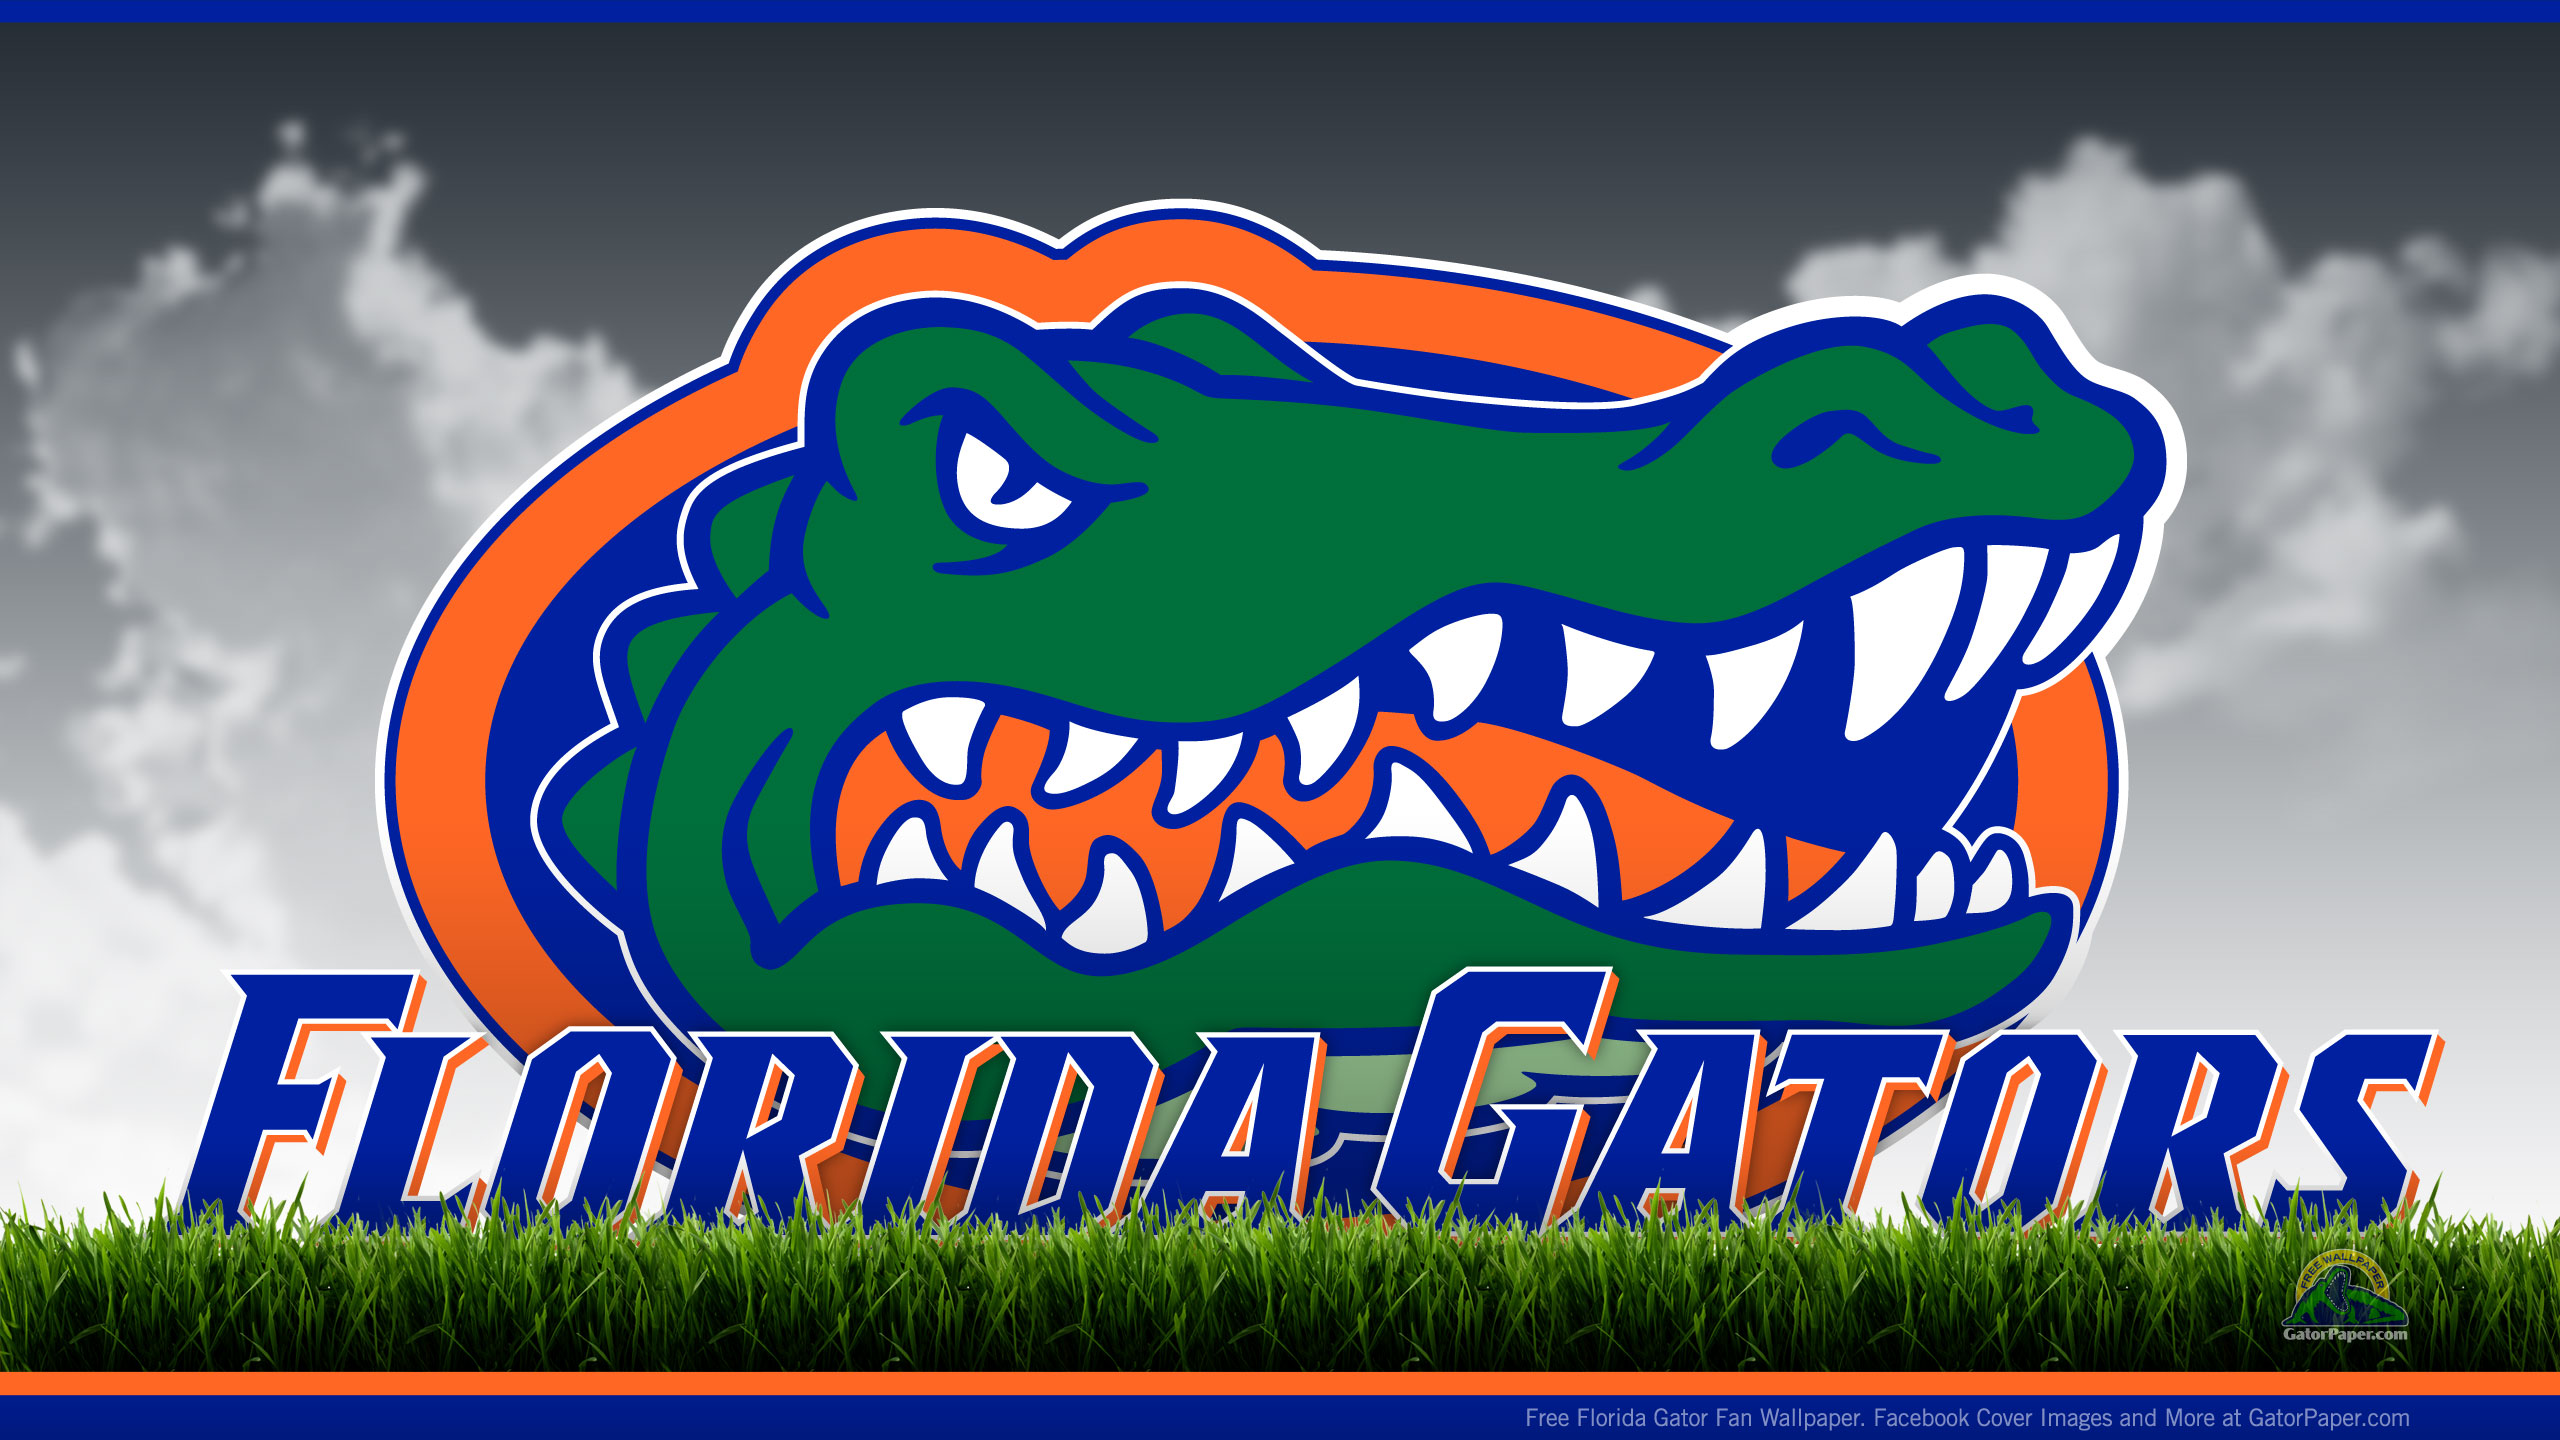 The Florida Gators In My Opinion A Logo Should Be Fierce It